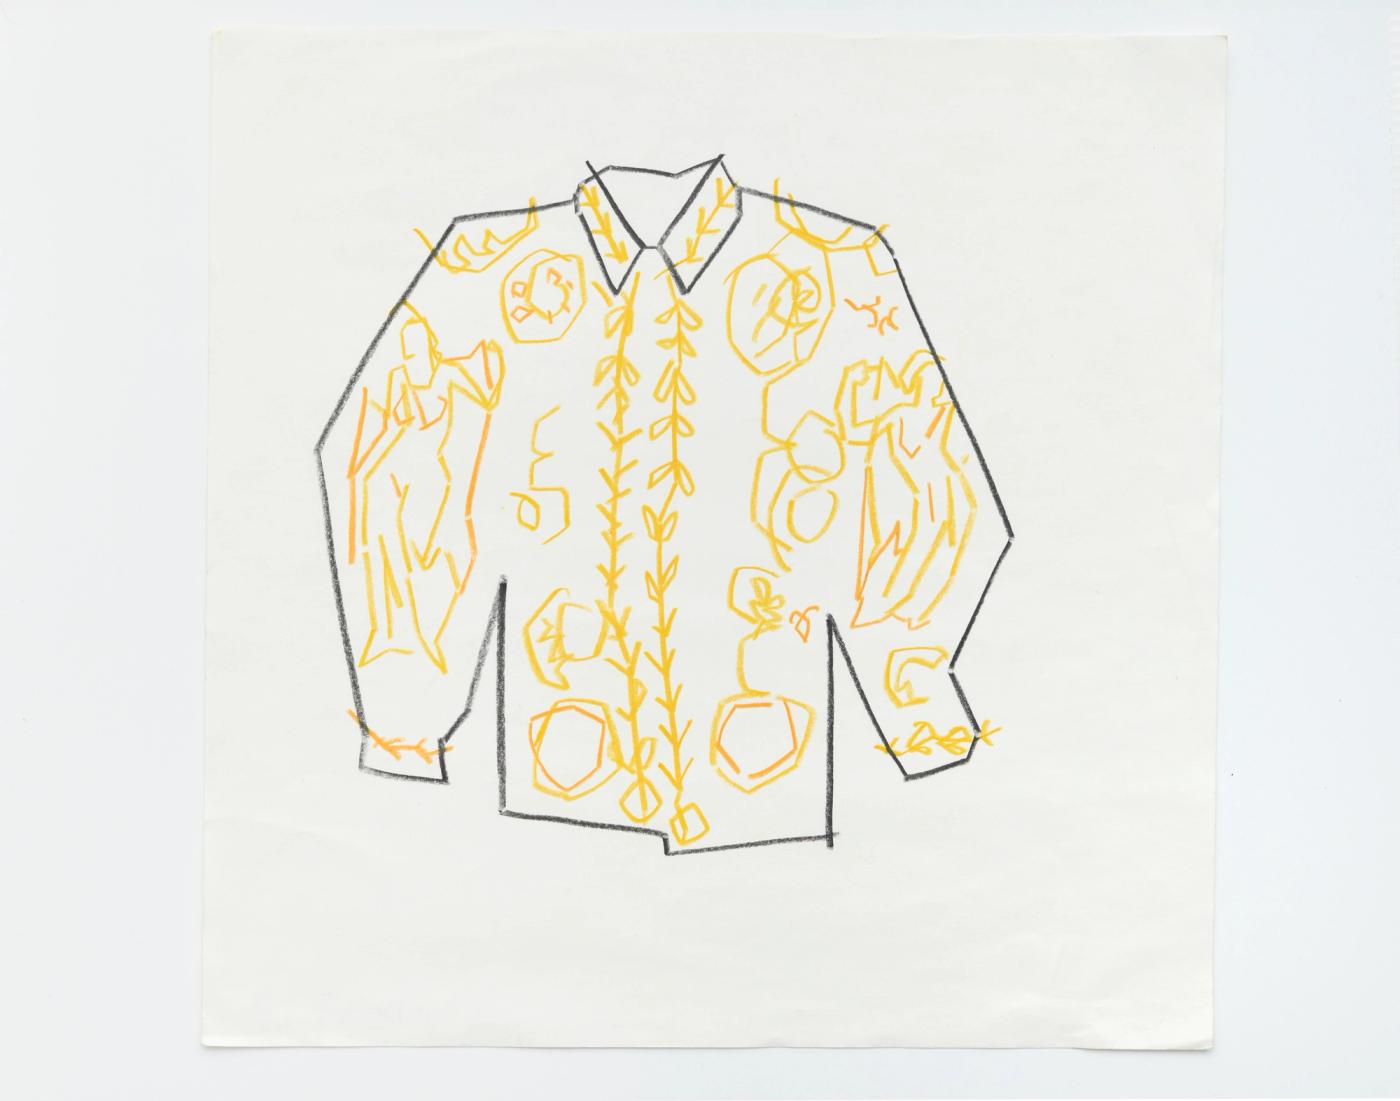 Image of Untitled (Versace shirt), 2021: Oil on pastel on paper